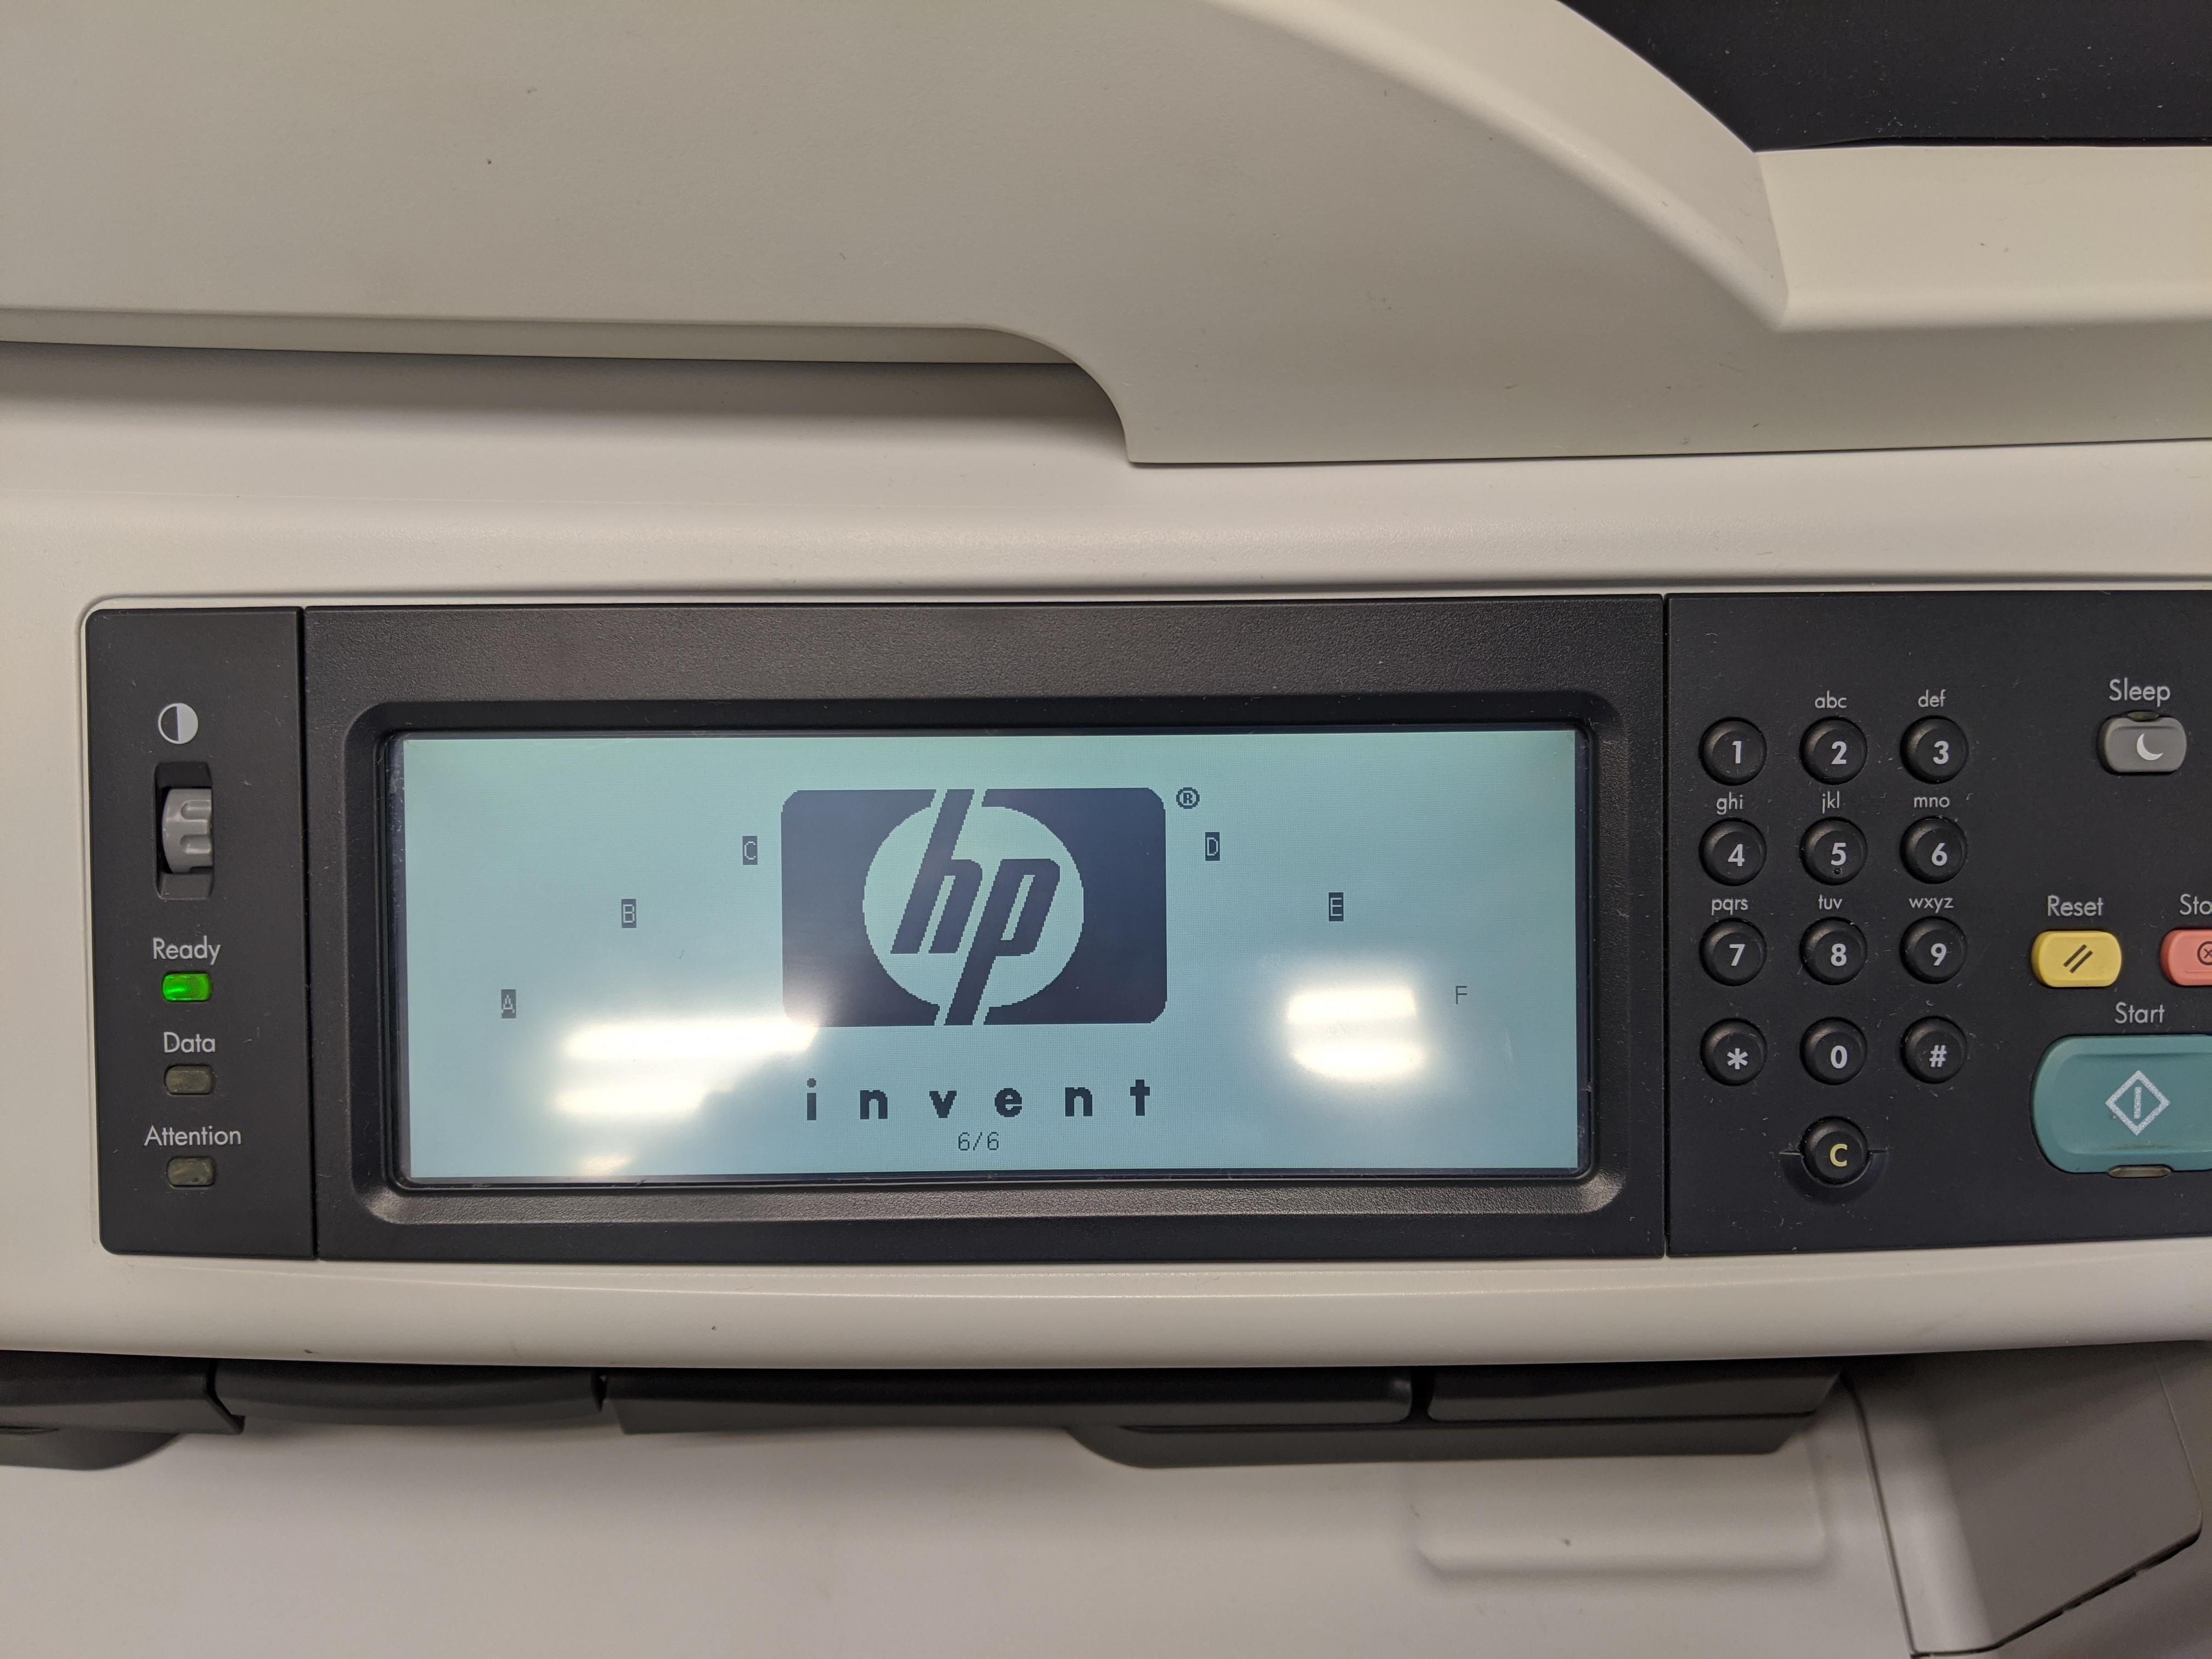 Printer stuck on boot screen 6/6 with ready light - HP Support Community -  7599533